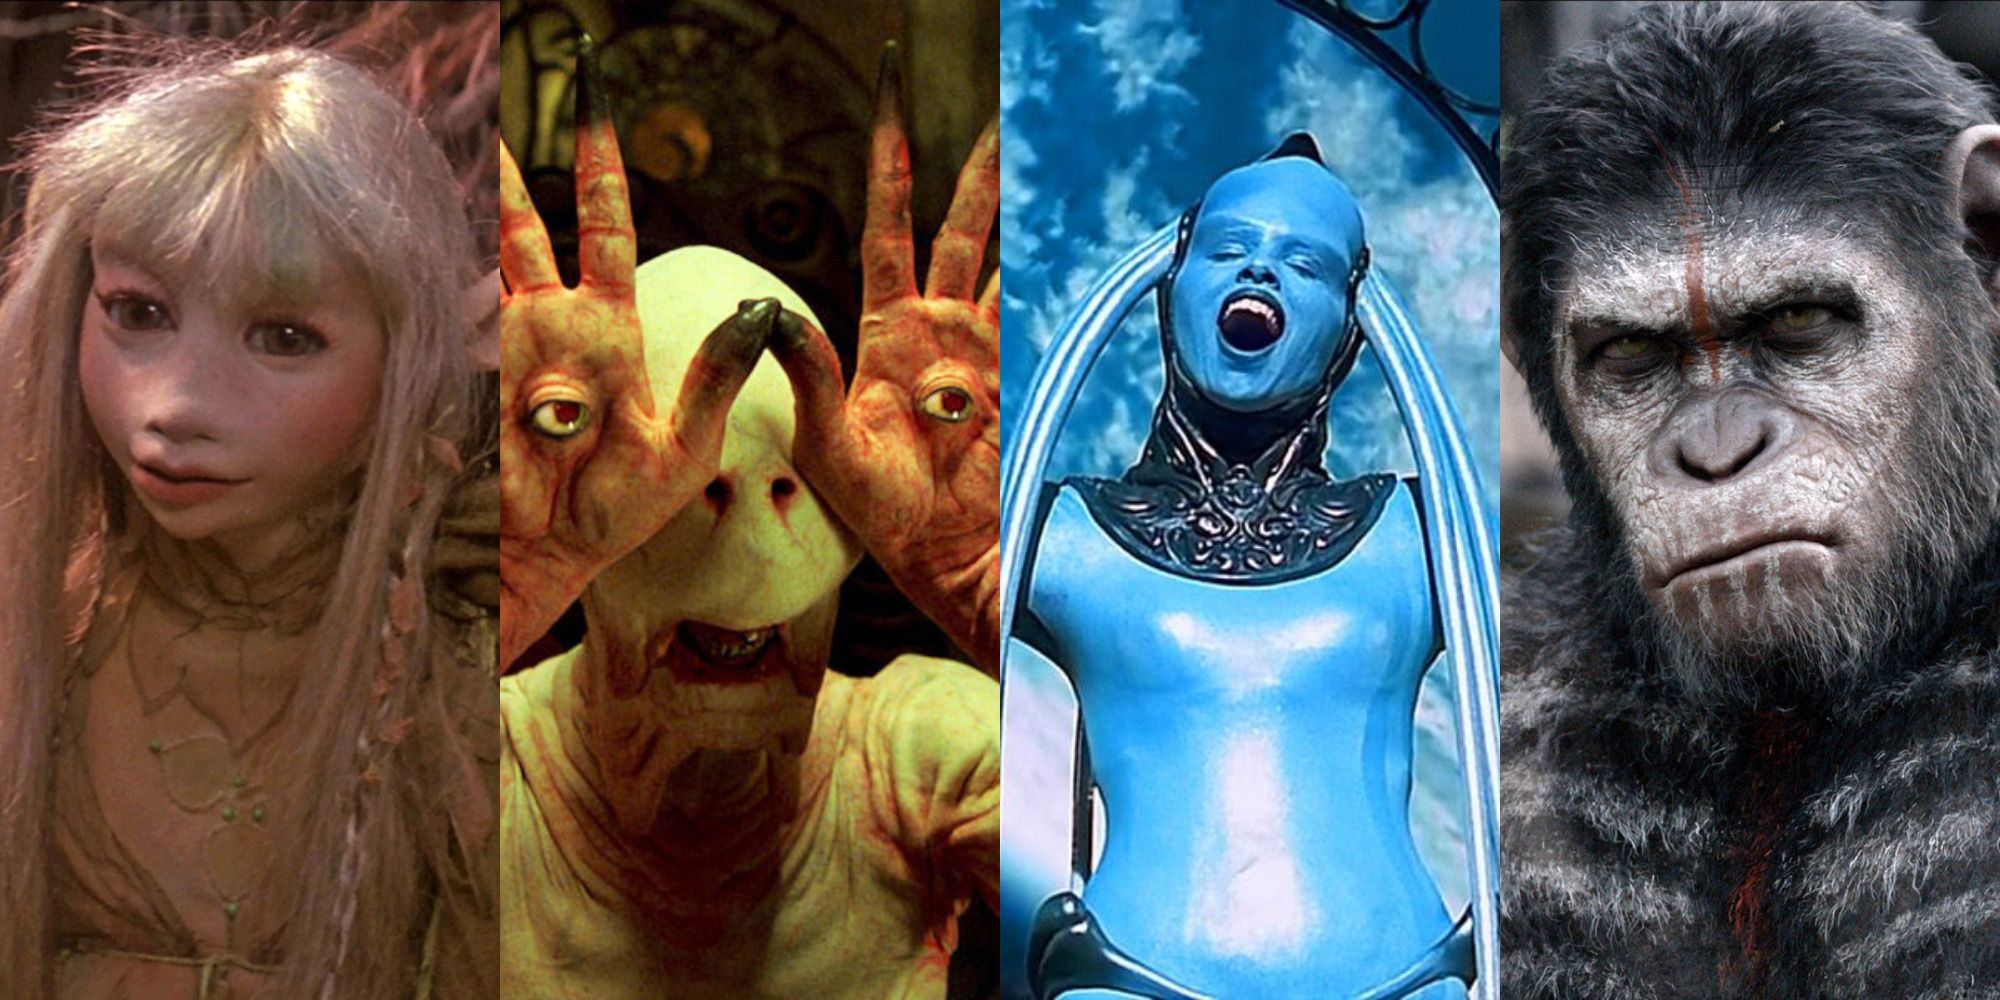 10 Best Fantasy Creature Movies To Watch Before Avatar: The Way of Water